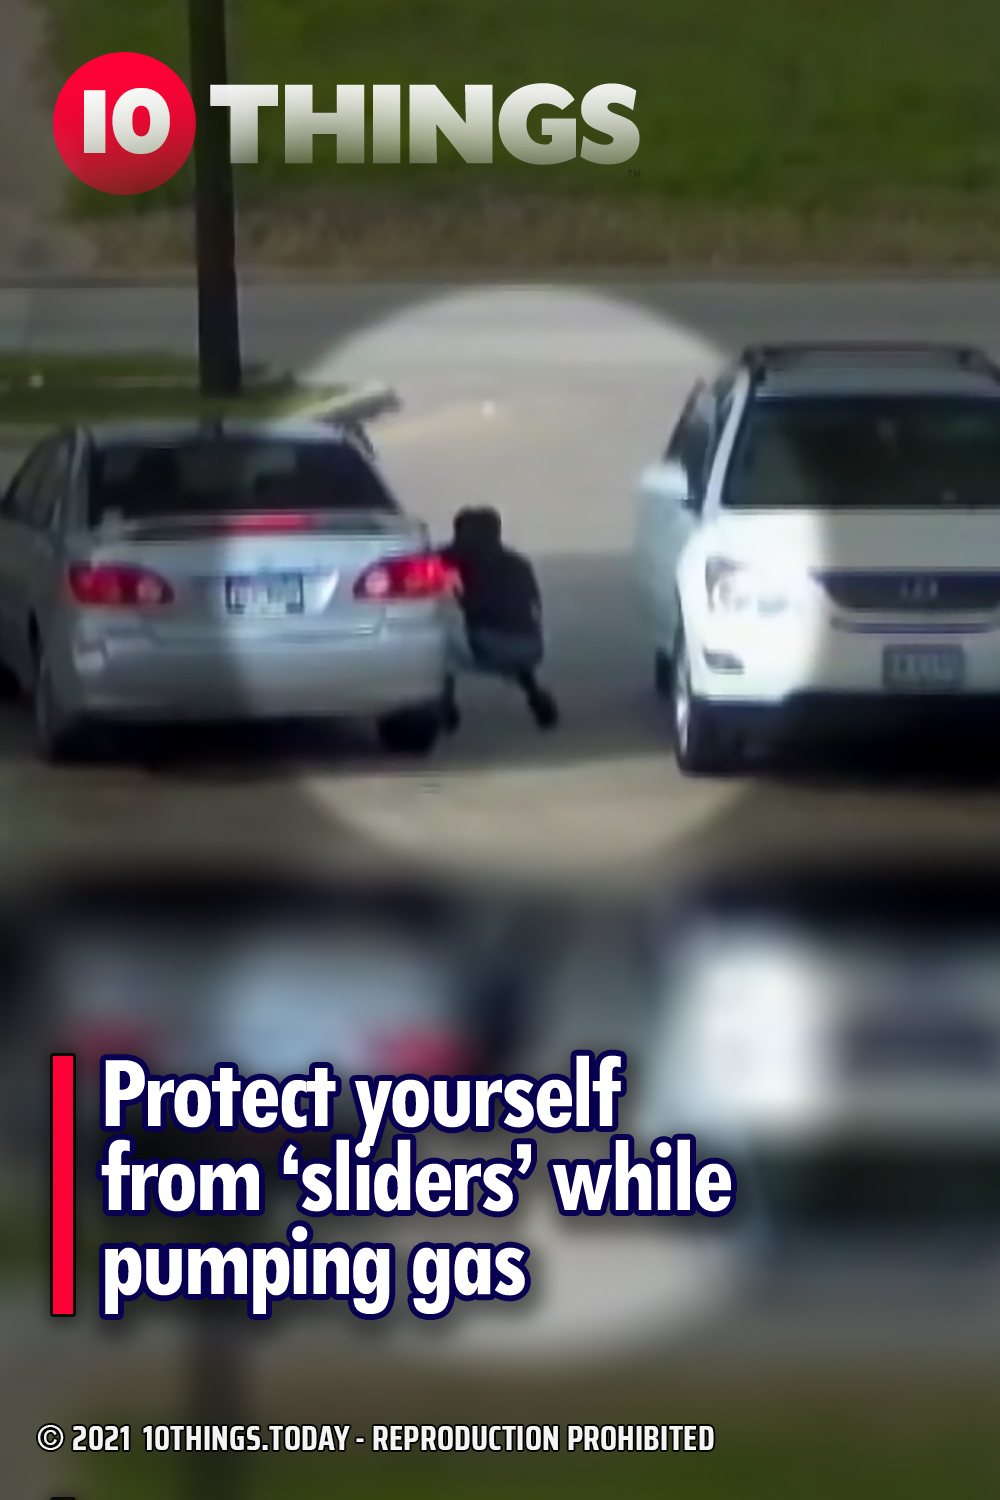 Protect yourself from ‘sliders’ while pumping gas